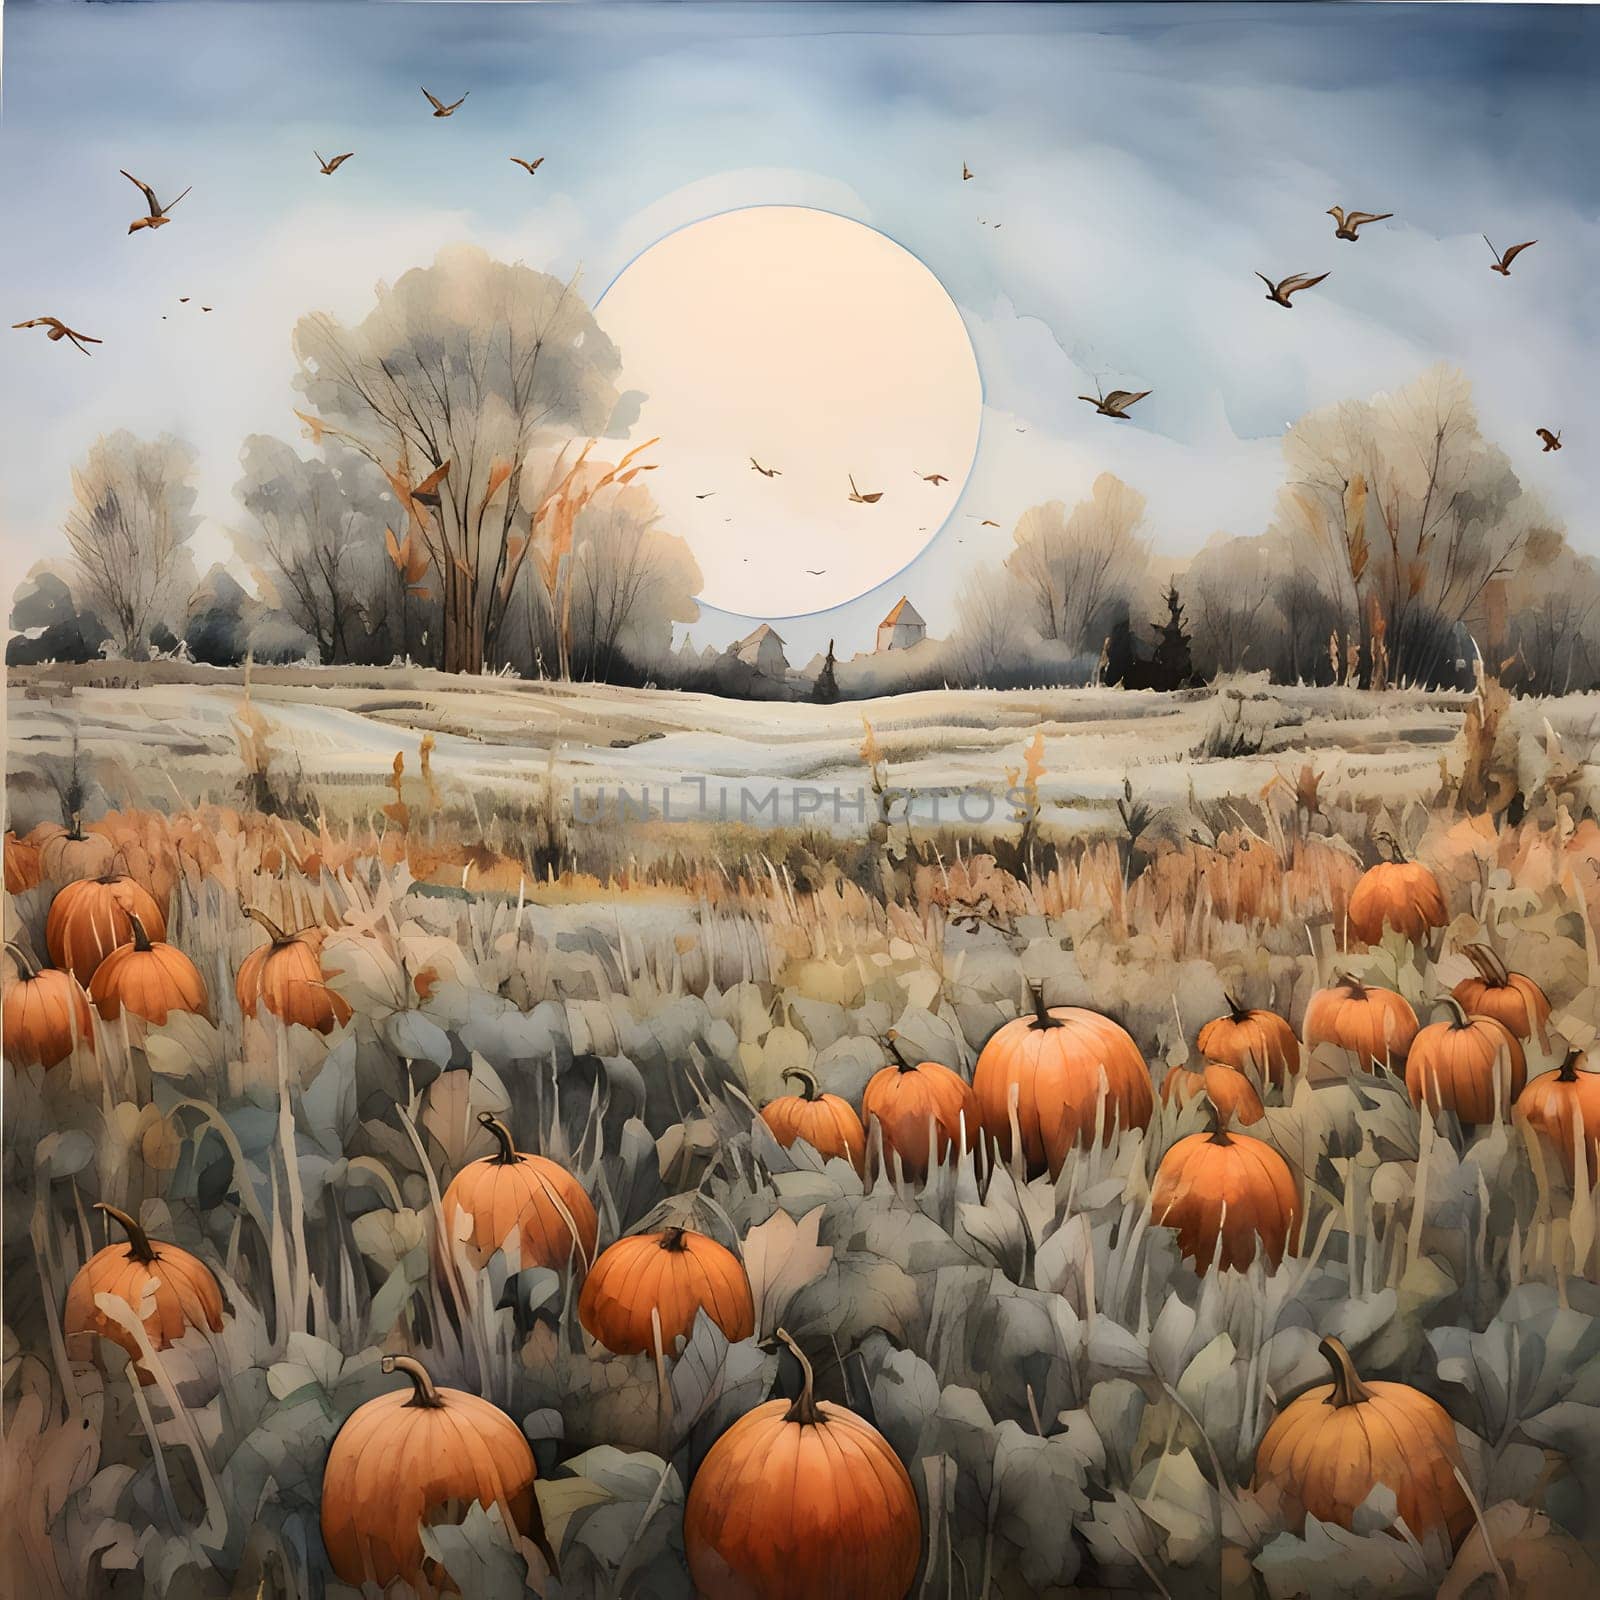 Illustration; pumpkins in the middle of tall leaves in the background moon flying birds paint picture. Pumpkin as a dish of thanksgiving for the harvest. by ThemesS